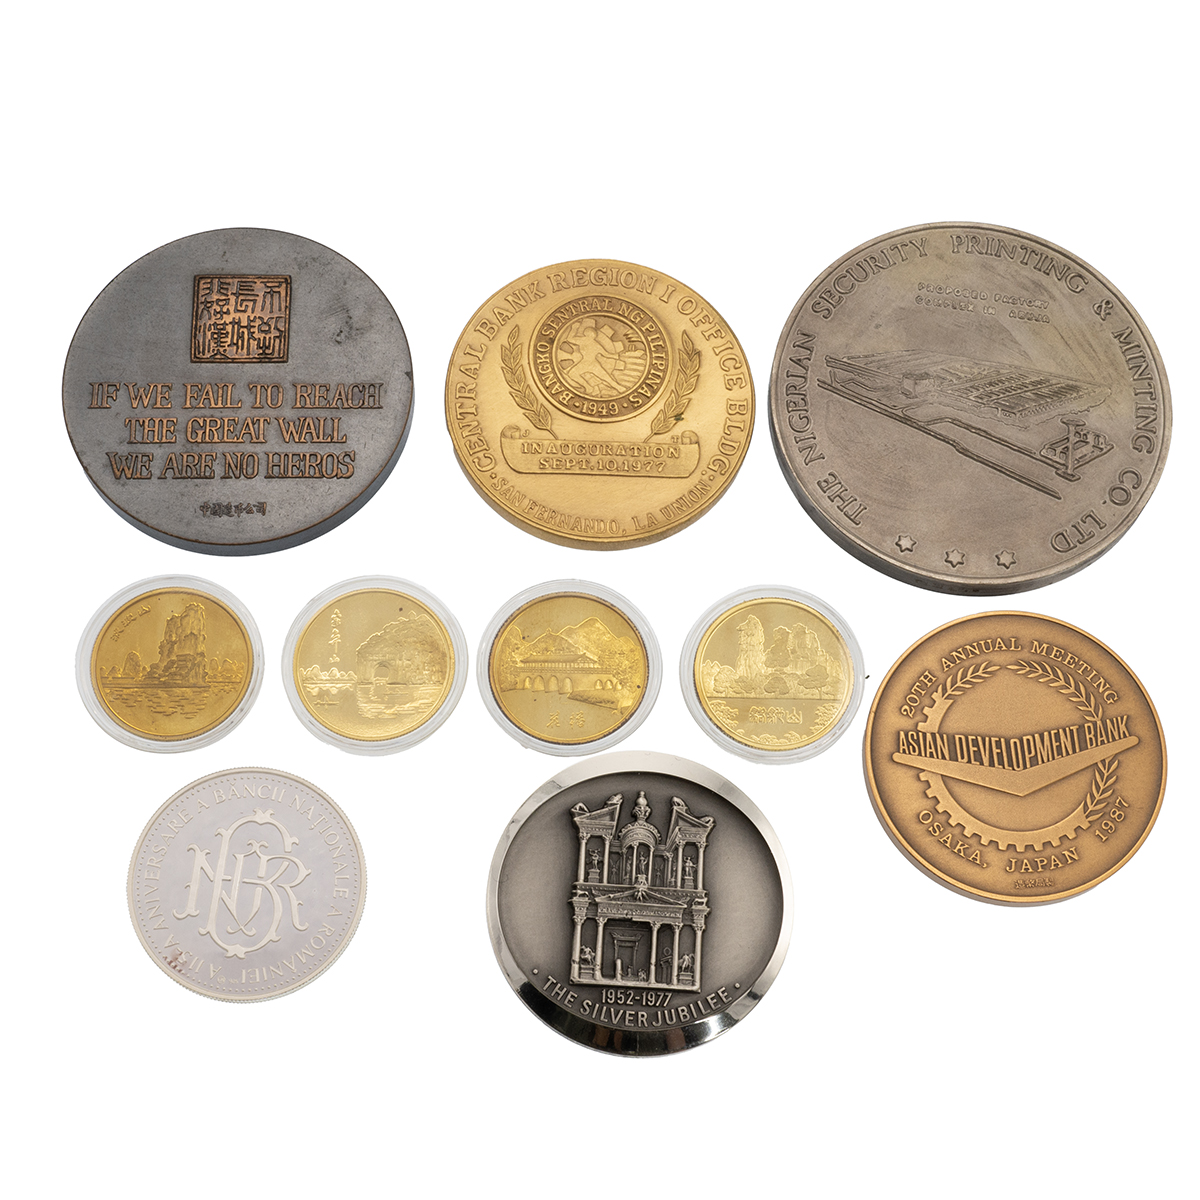 Seven (7) commemorative mint and souvenir medals in copper, bronze and silver, all boxed. Include... - Image 2 of 3